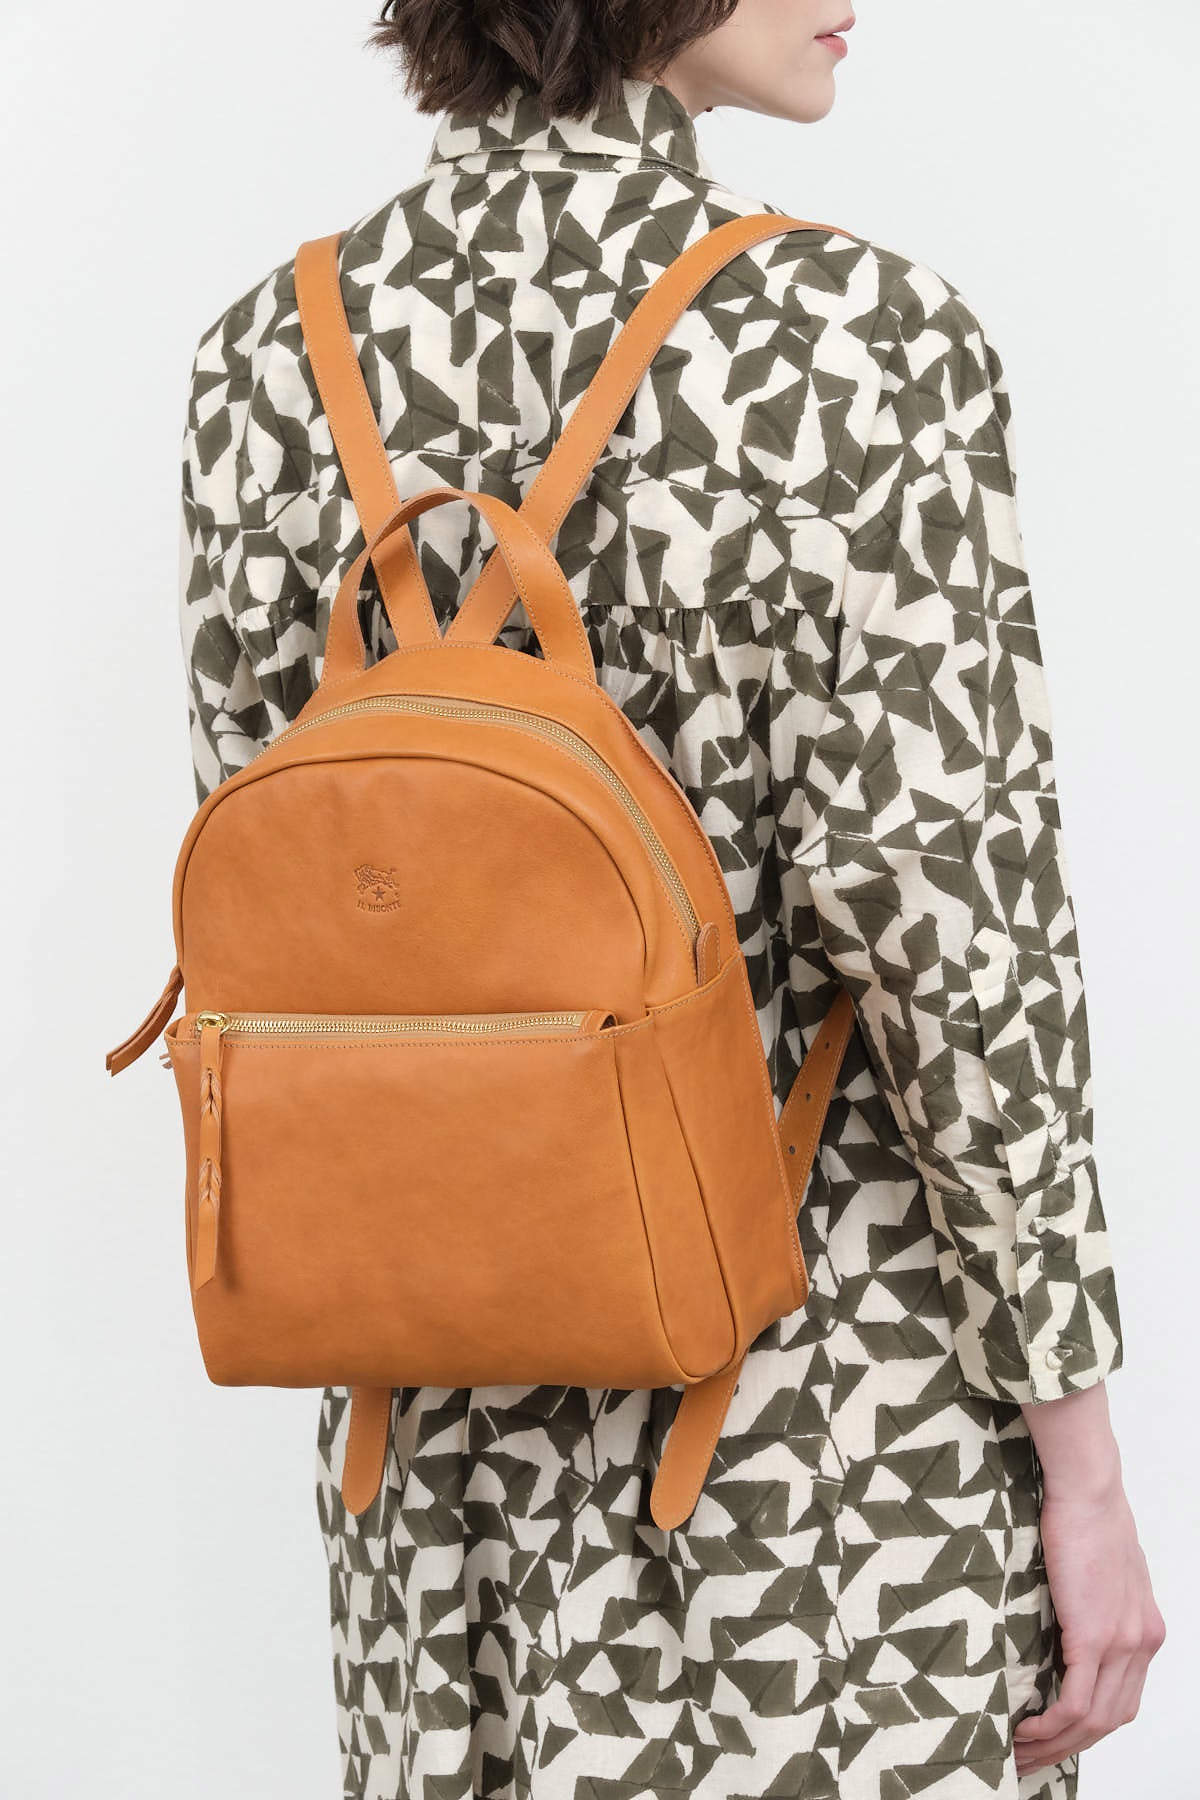 Styled Lungarno Backpack Bag